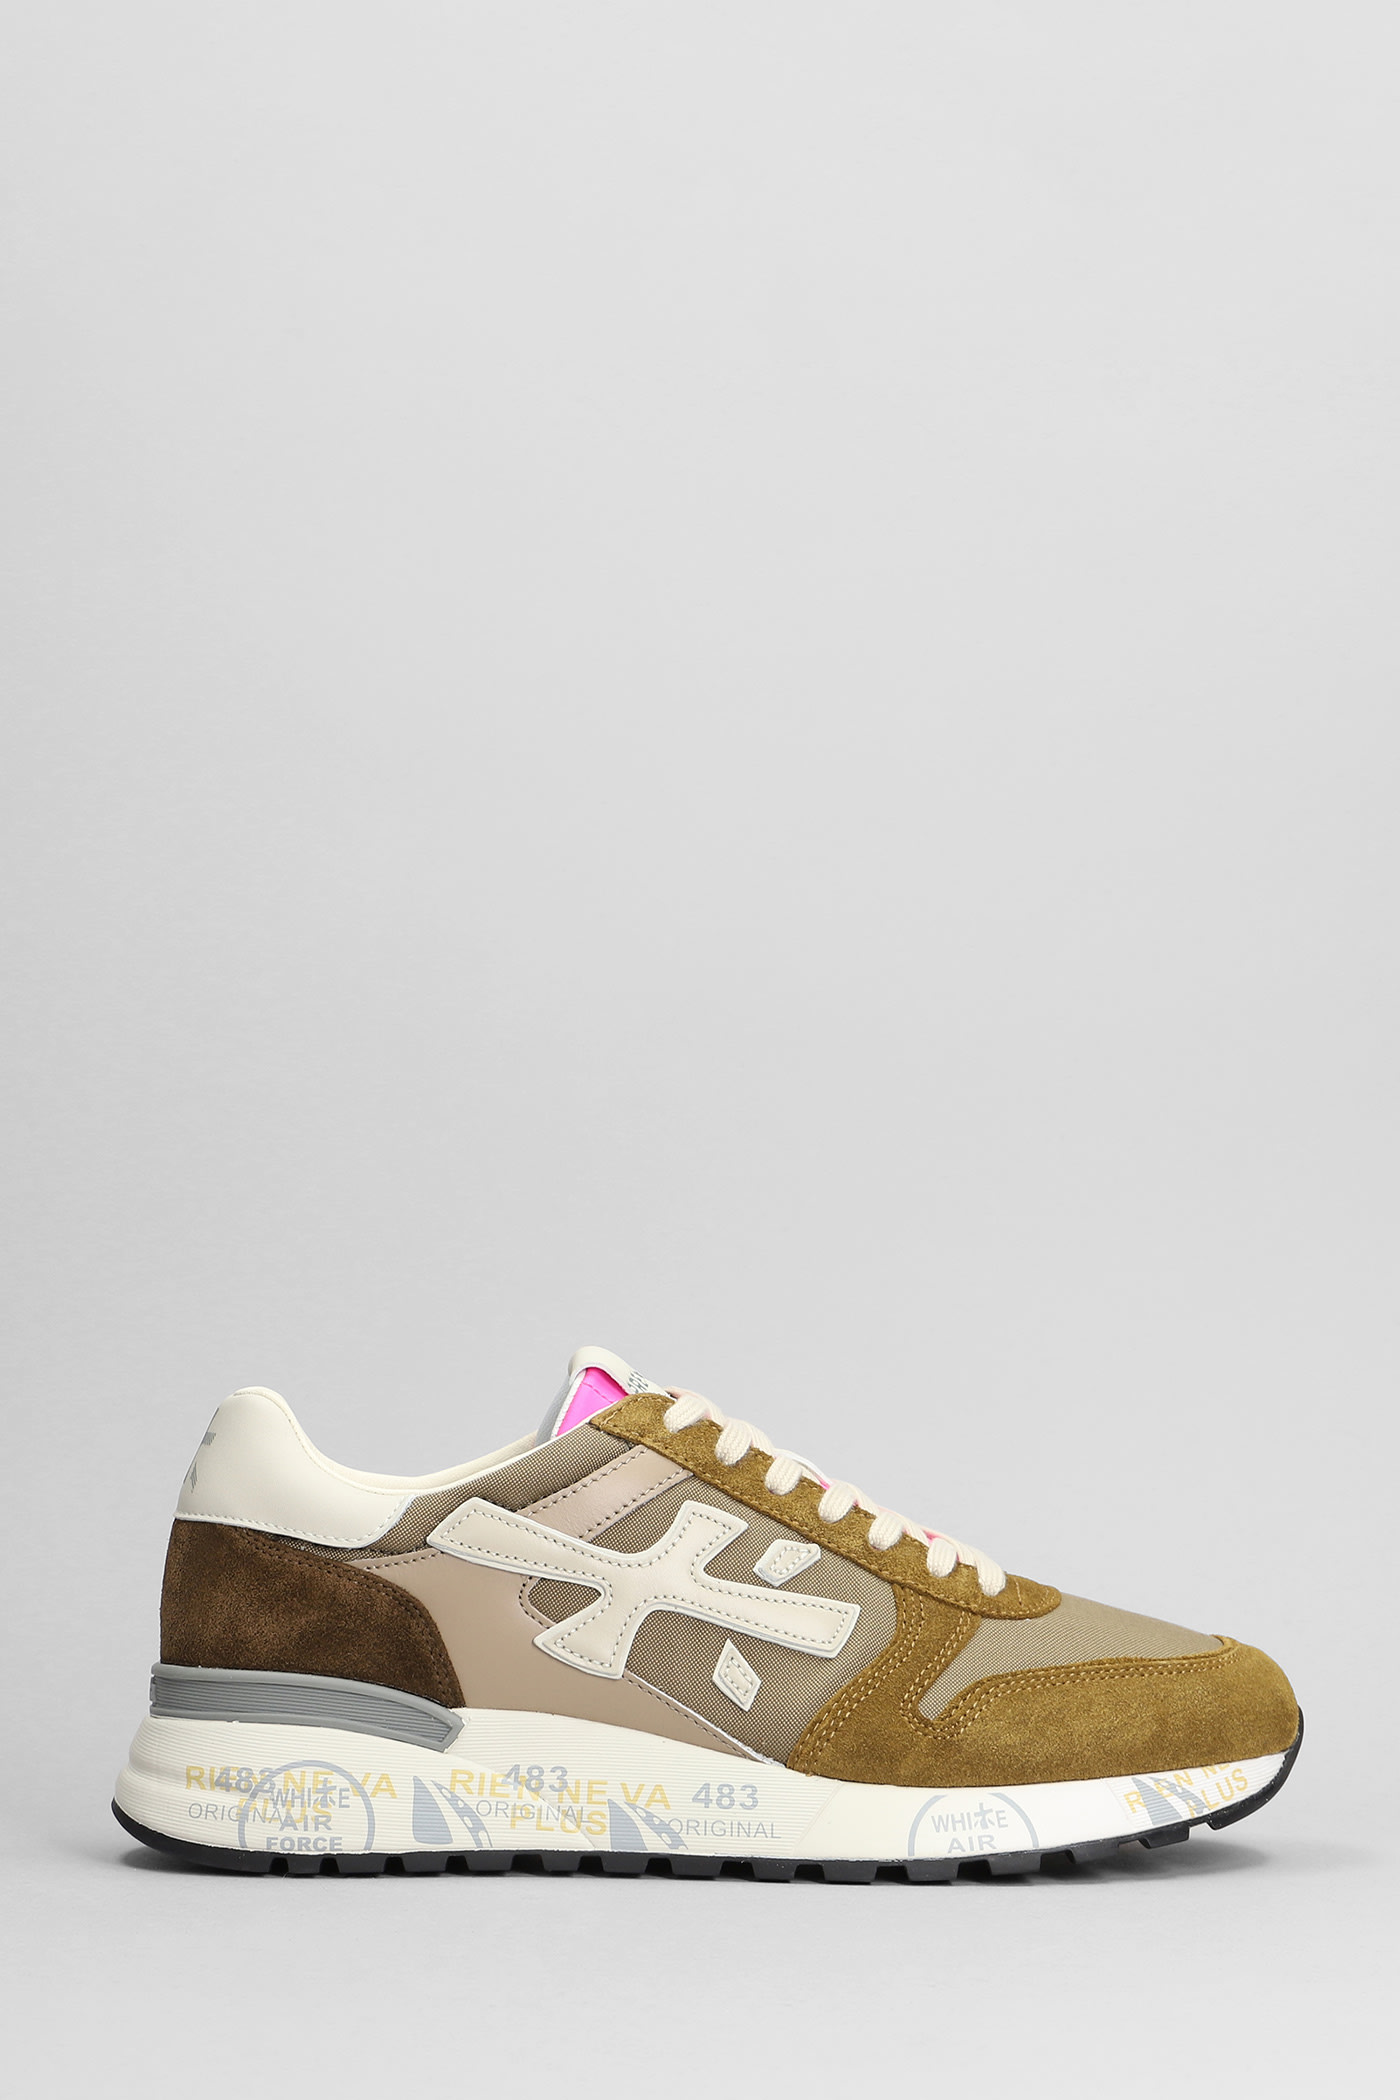 Shop Premiata Mick Sneakers In Leather Color Suede And Fabric